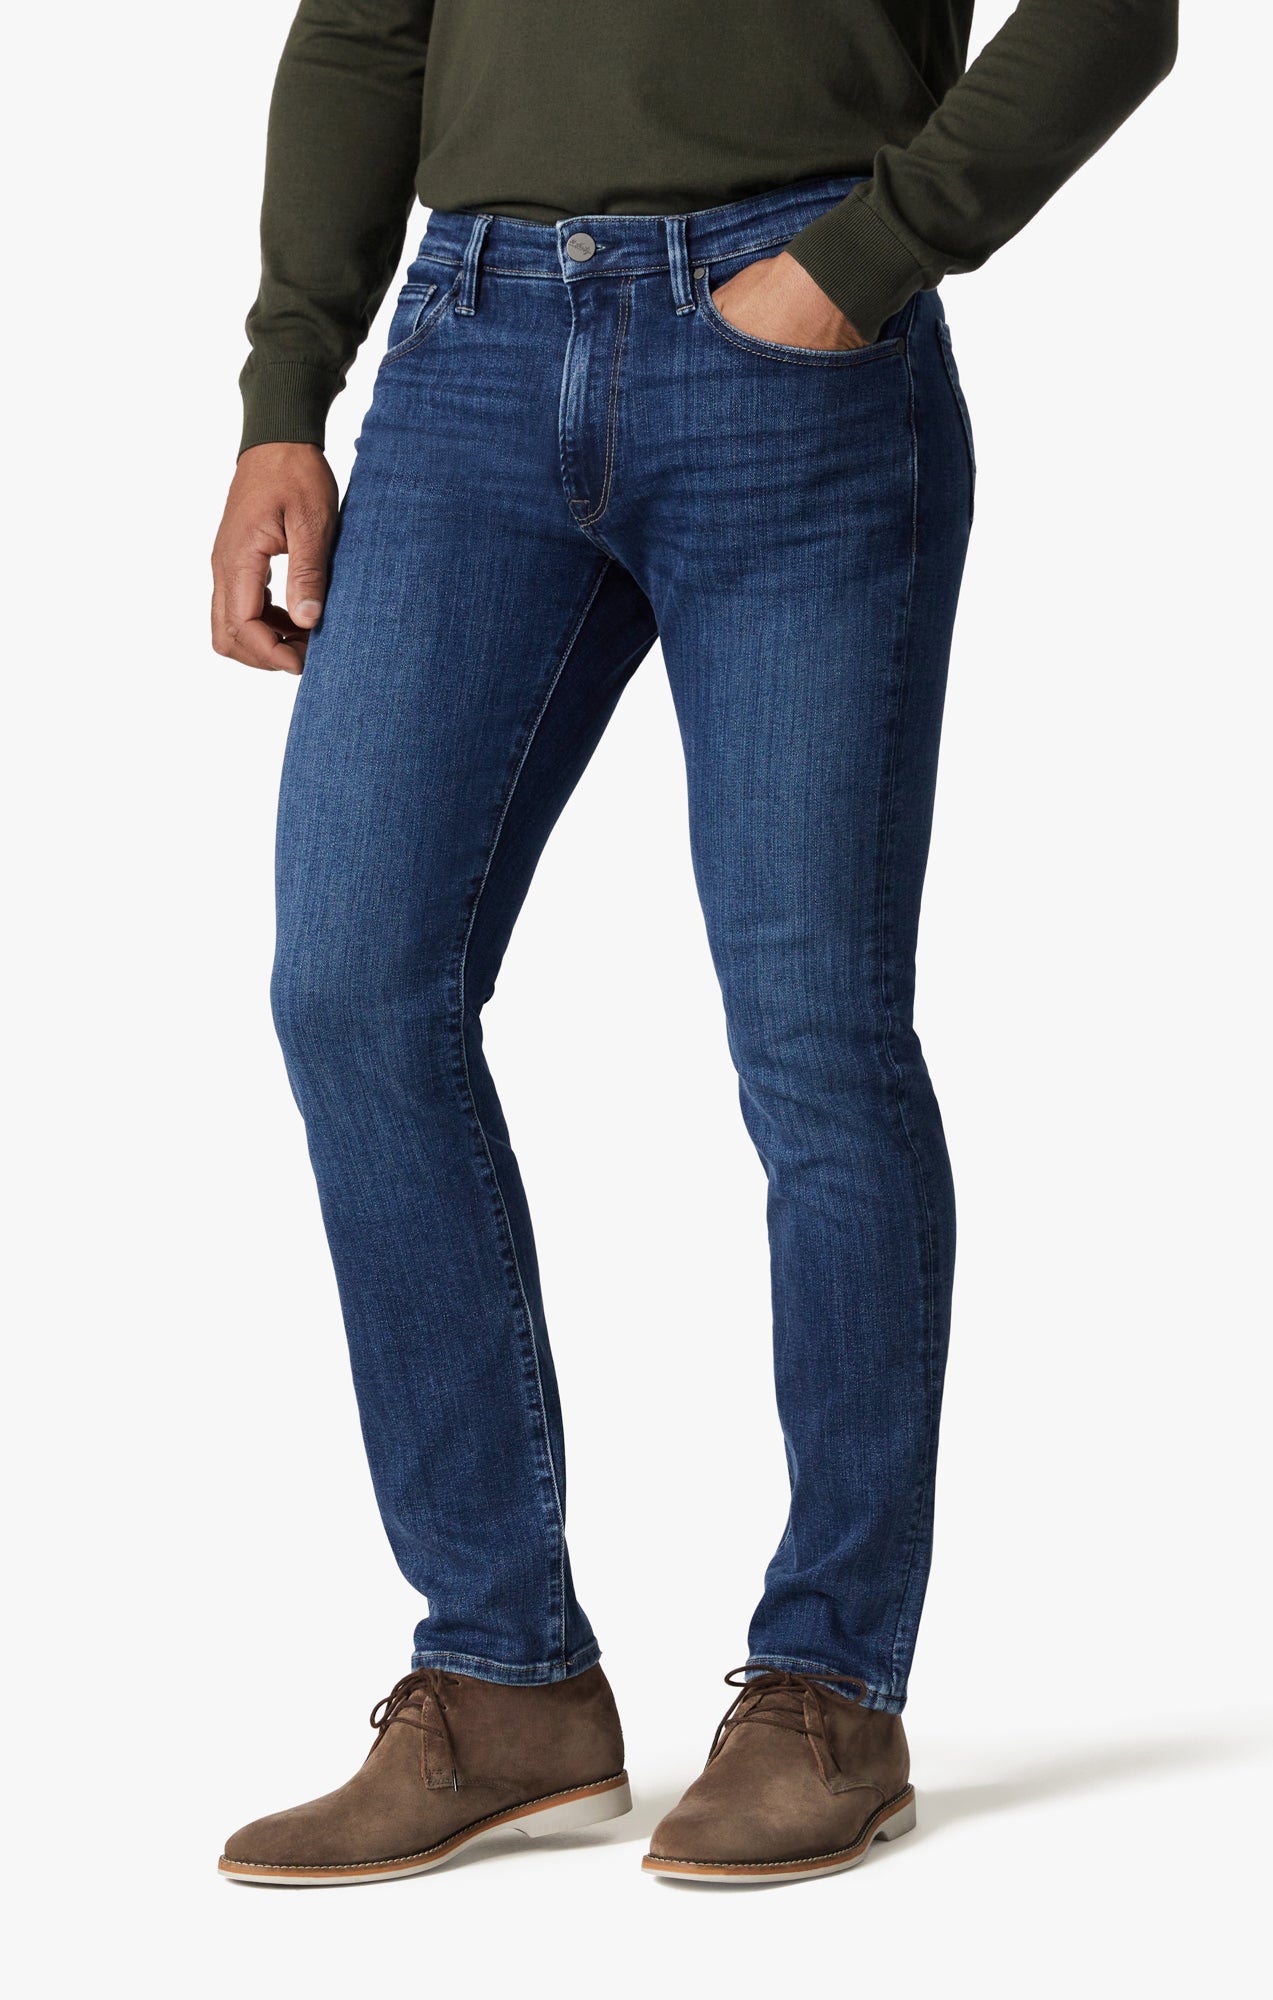 Courage Straight Leg Jeans in Deep Brushed Organic Image 3